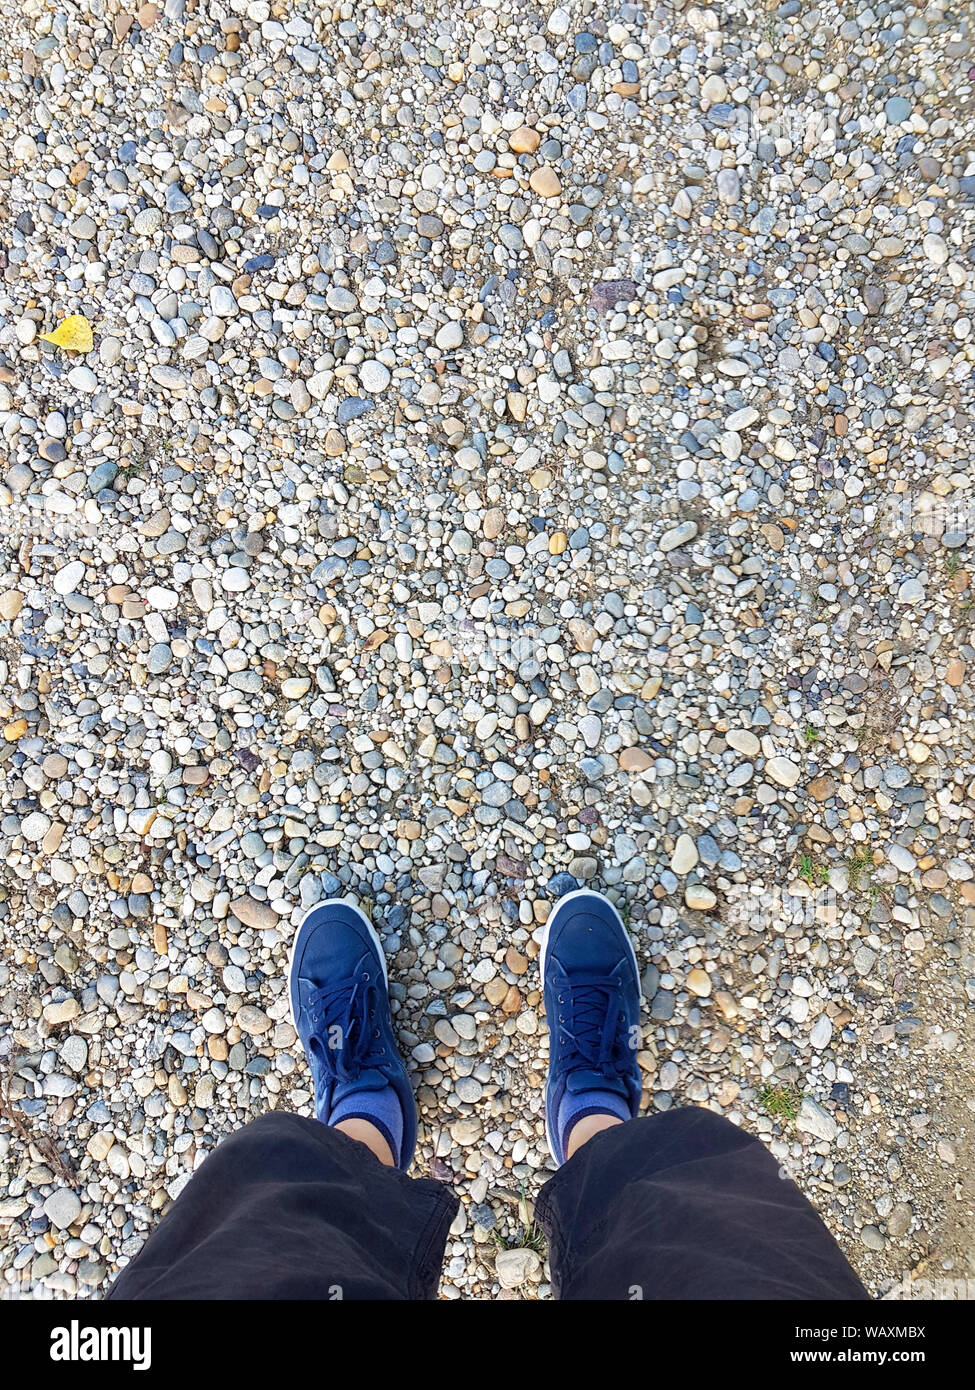 Look down at the blue sneakers on the gravel. A man in casual shorts and blue sneakers. Stock Photo